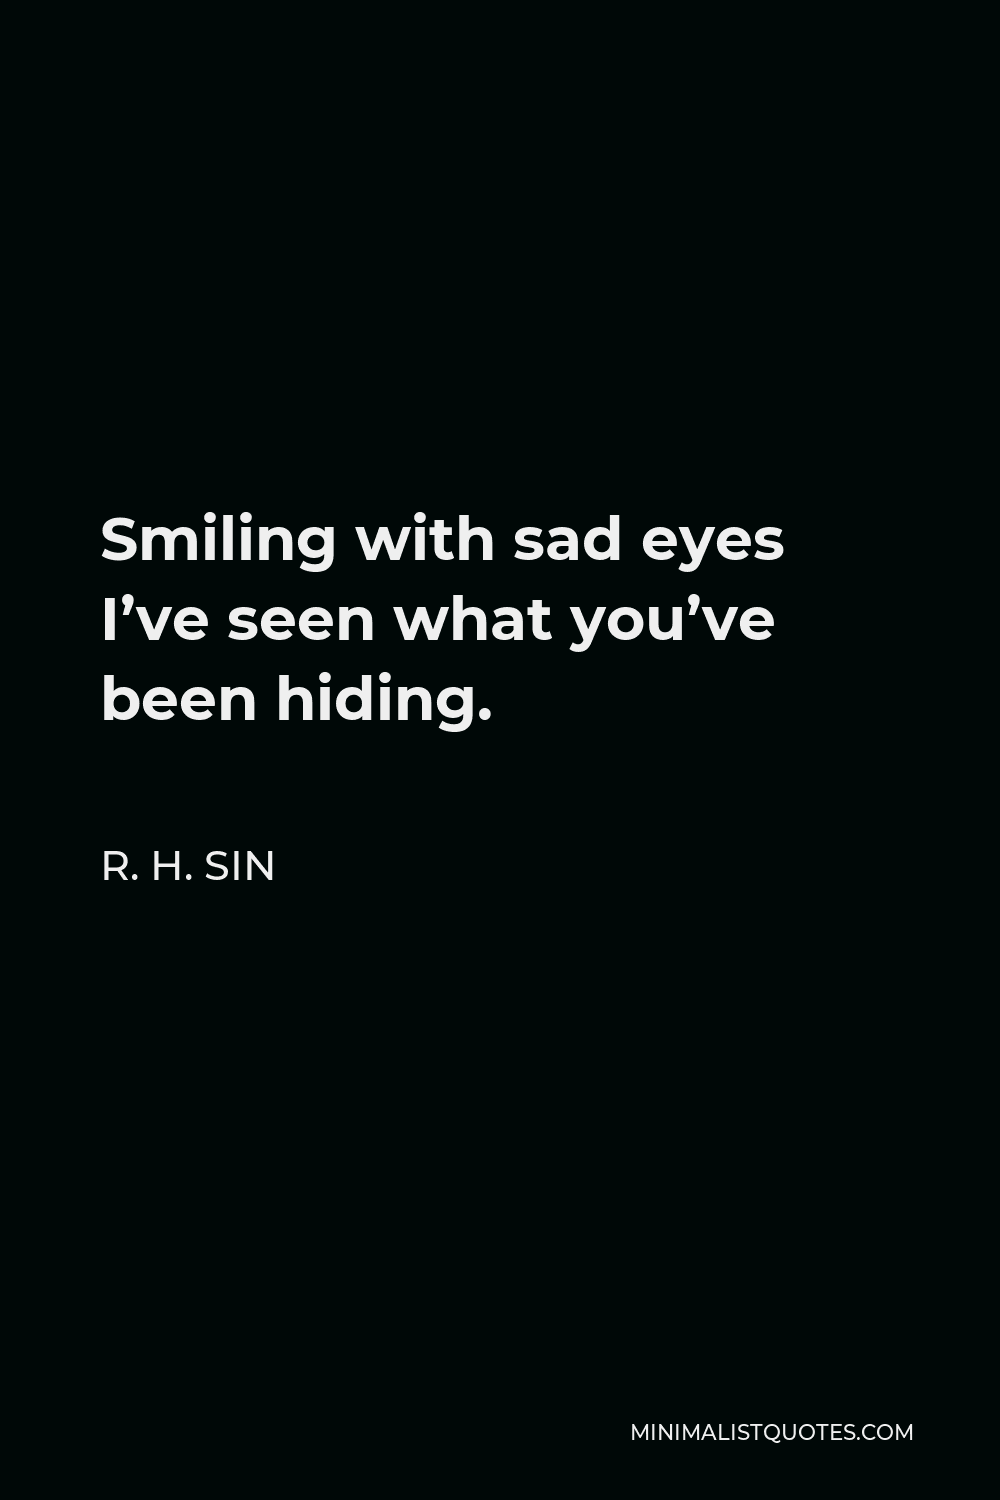 R. H. Sin Quote - Smiling with sad eyes I’ve seen what you’ve been hiding.